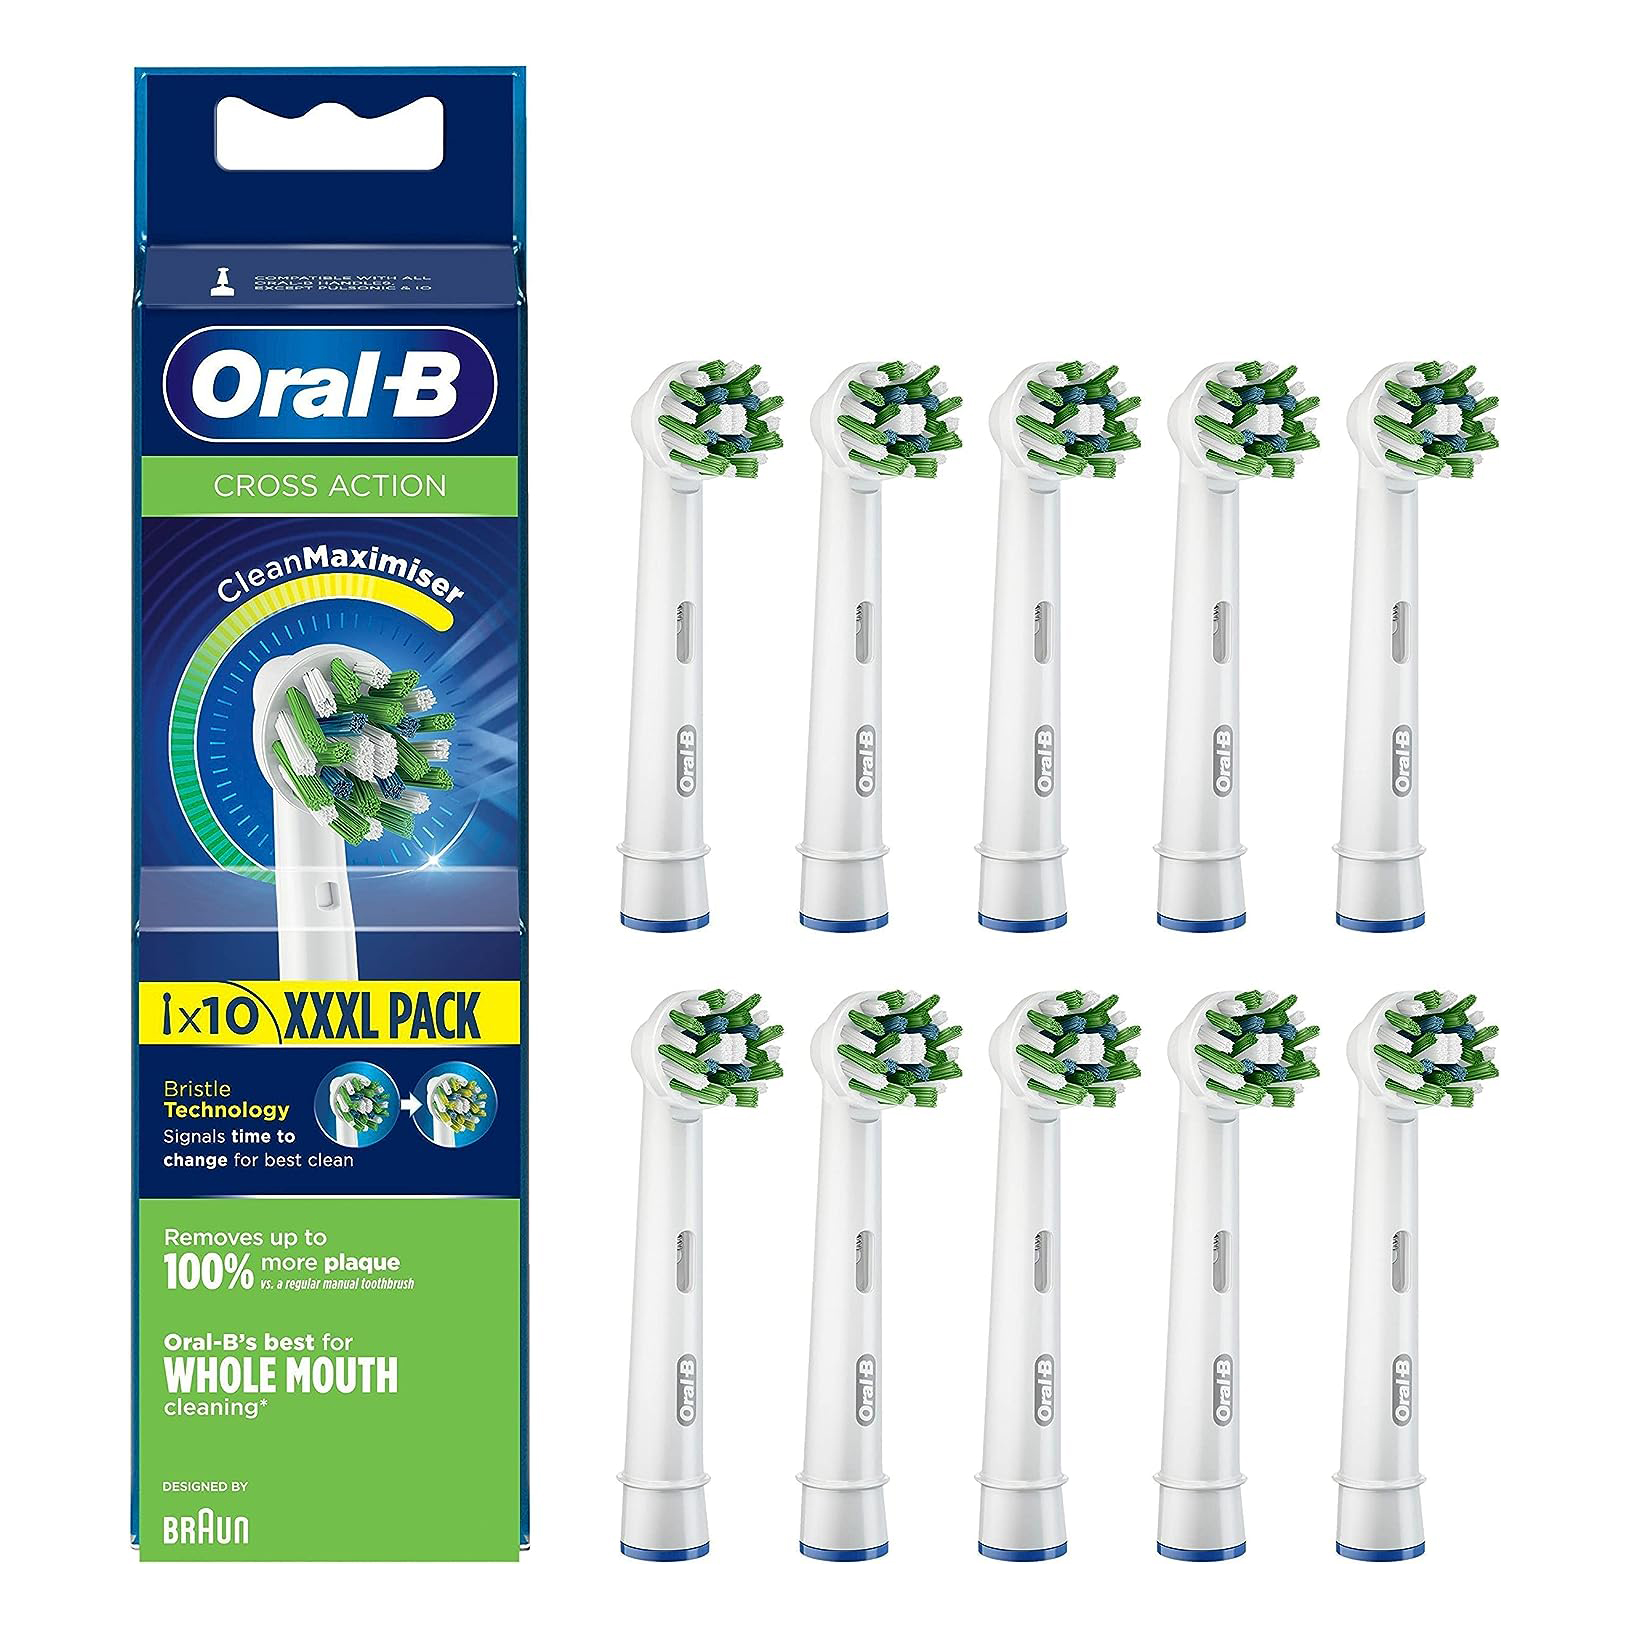 Oral-B CrossAction Electric Toothbrush Heads with CleanMaximiser Technology – White 10 Pack Electric Toothbrush  |  Replacement Heads  |